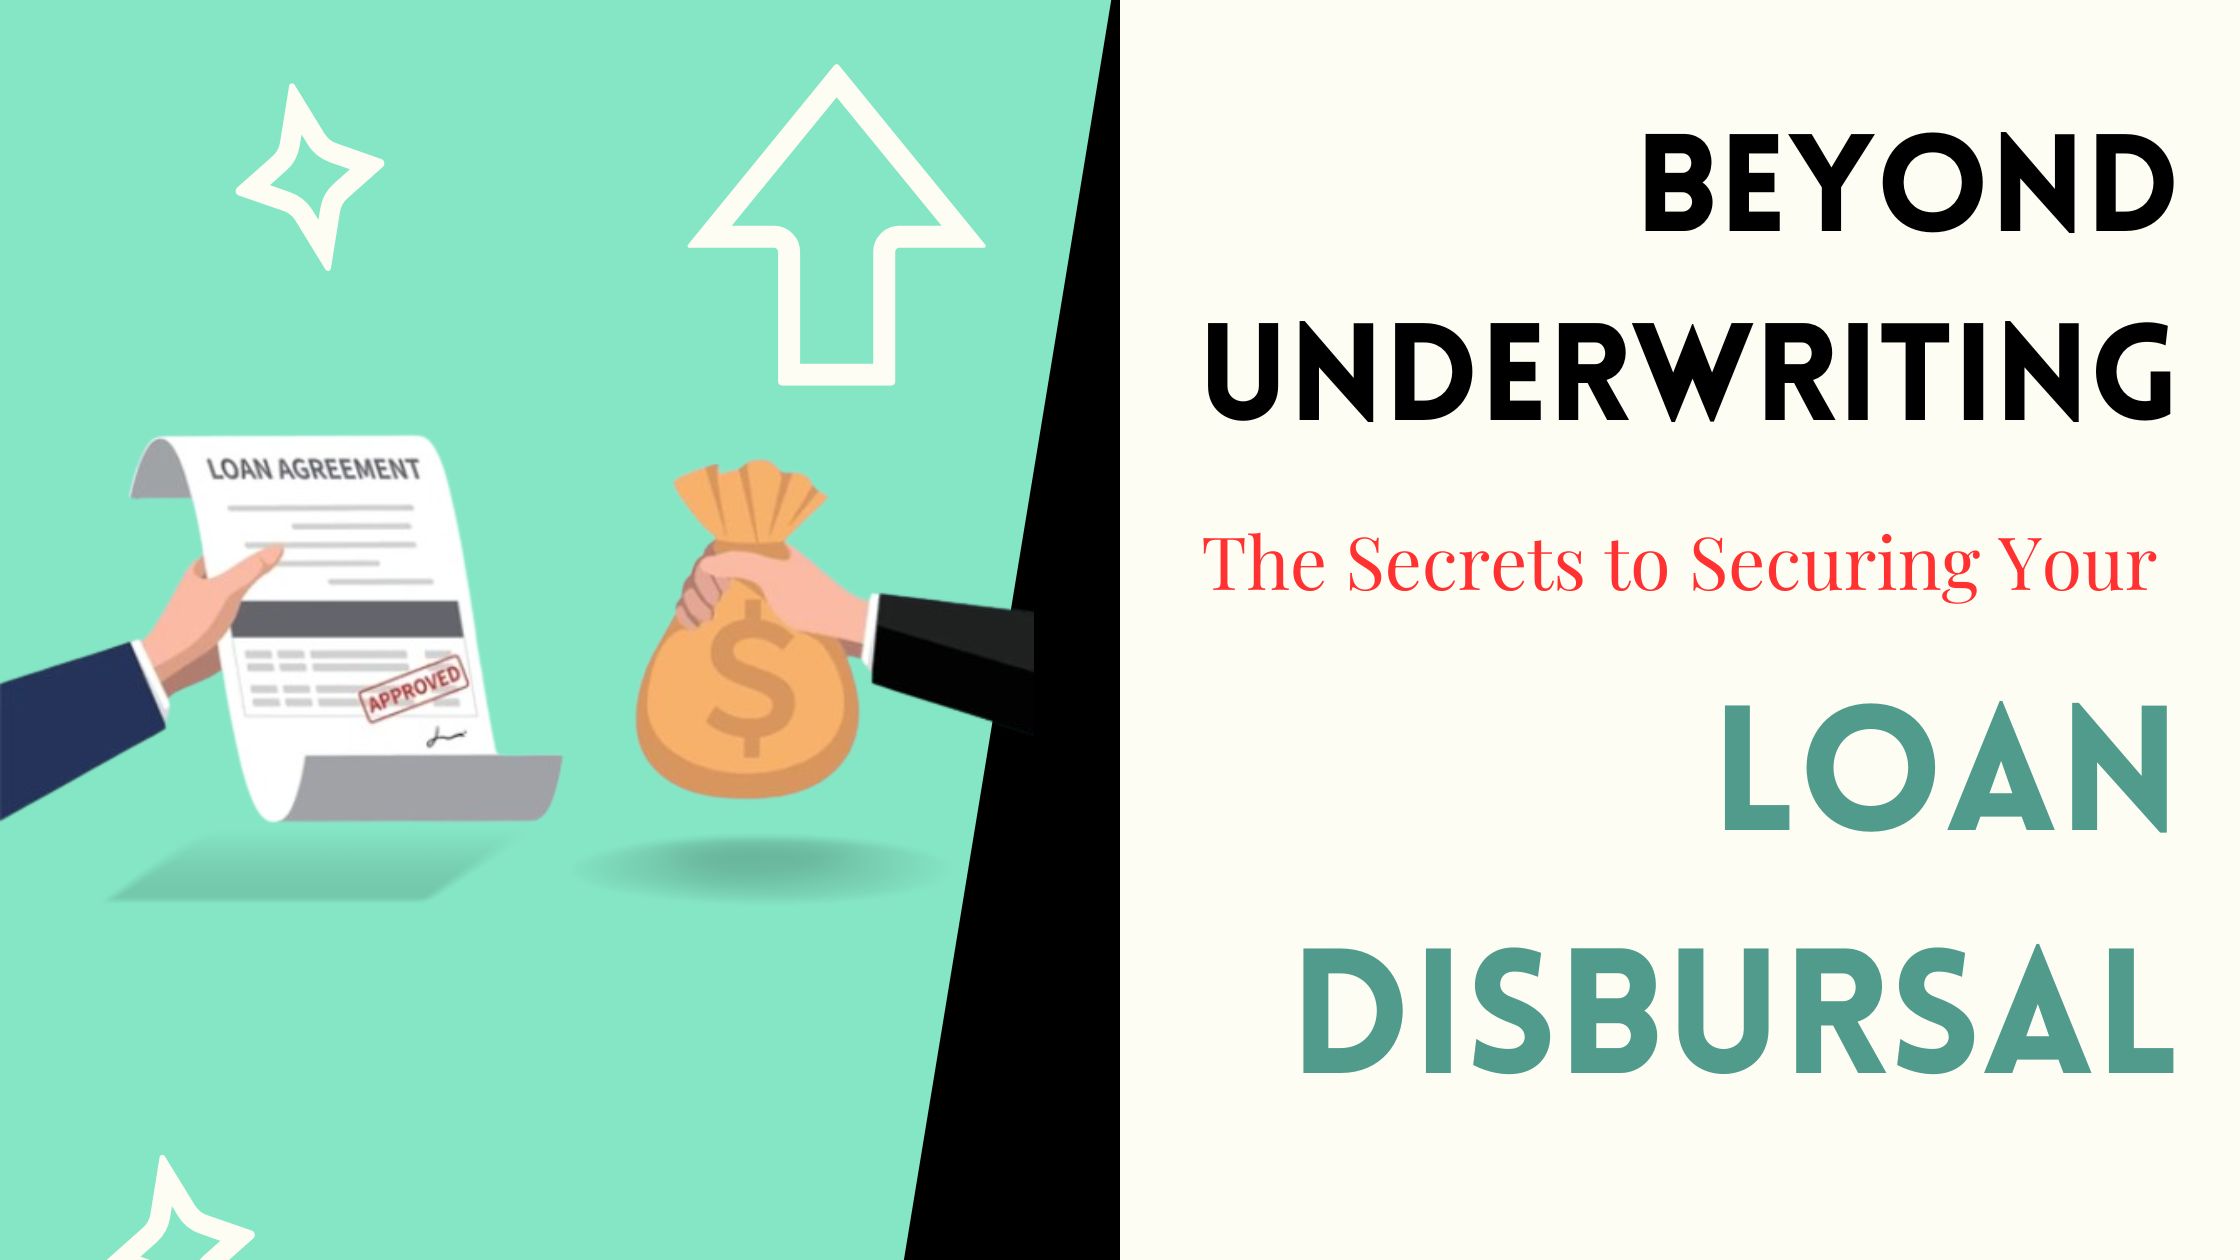 Beyond Underwriting: The Secrets to Securing Your Loan Disbursal